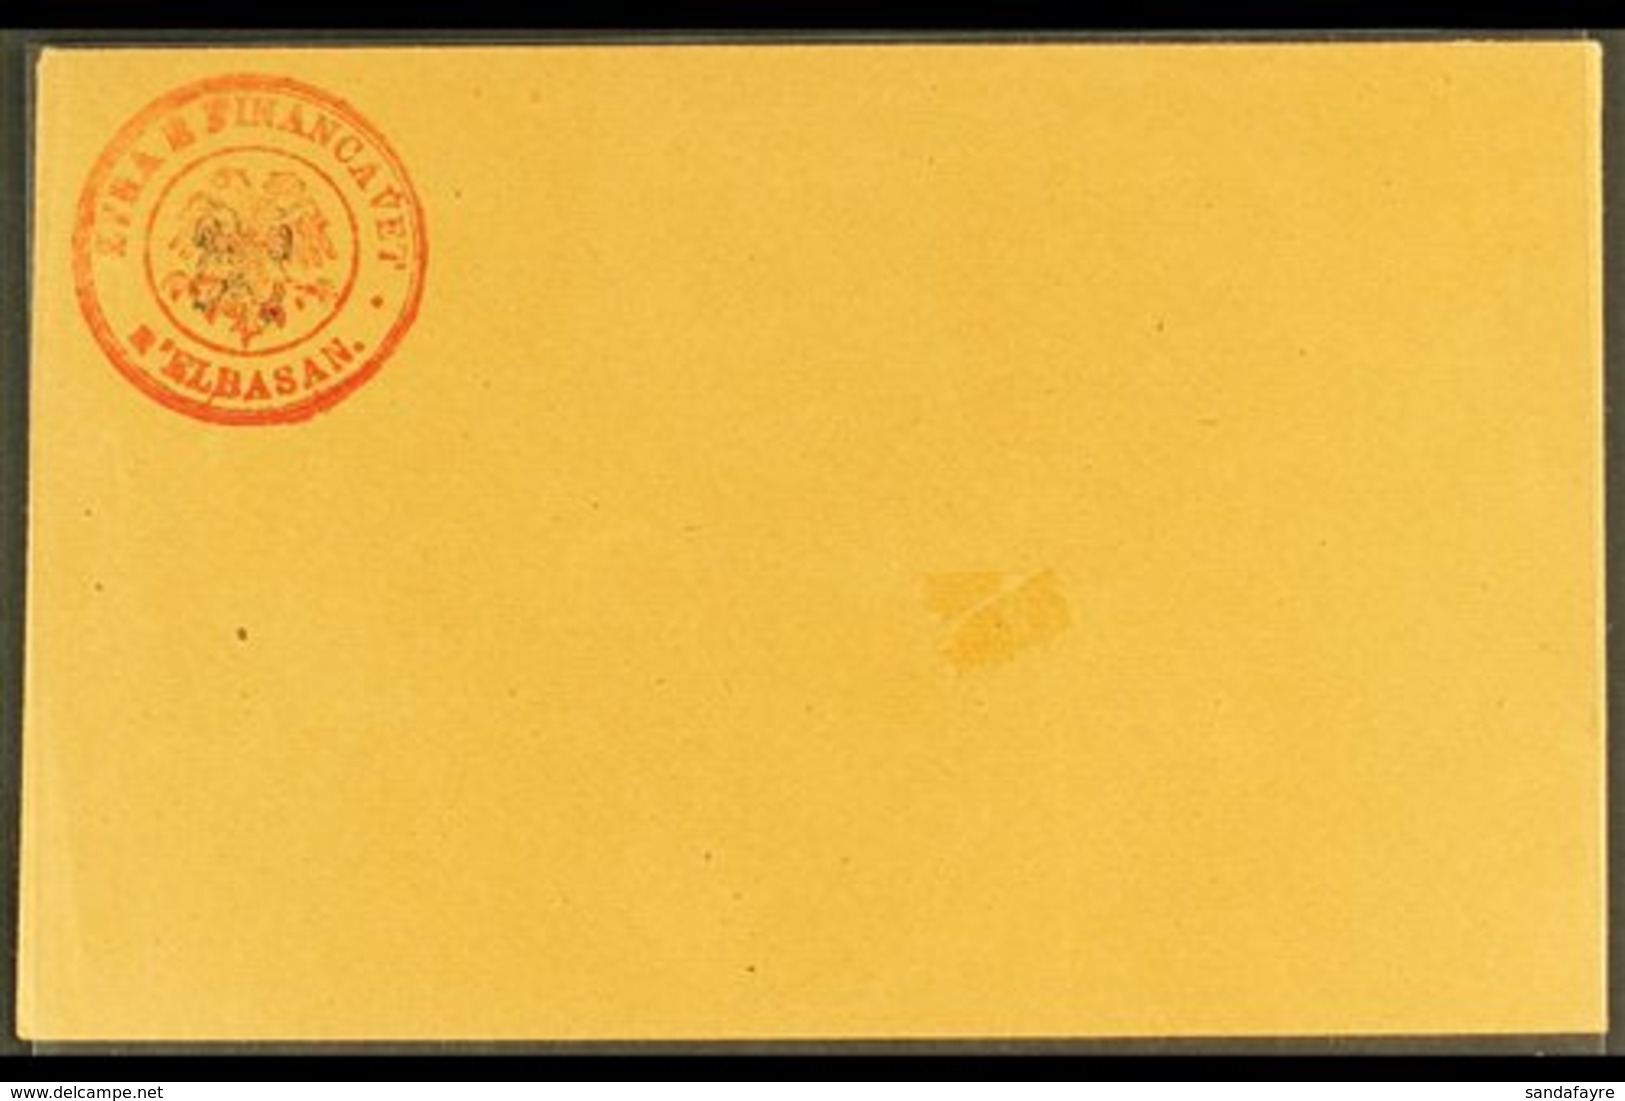 1919 DURRES GOVERNMENT POST.  1919 (1 Gr) Postal Stationery Envelope, Michel U1, Very Fine Unused With Small Mark On Fro - Albania